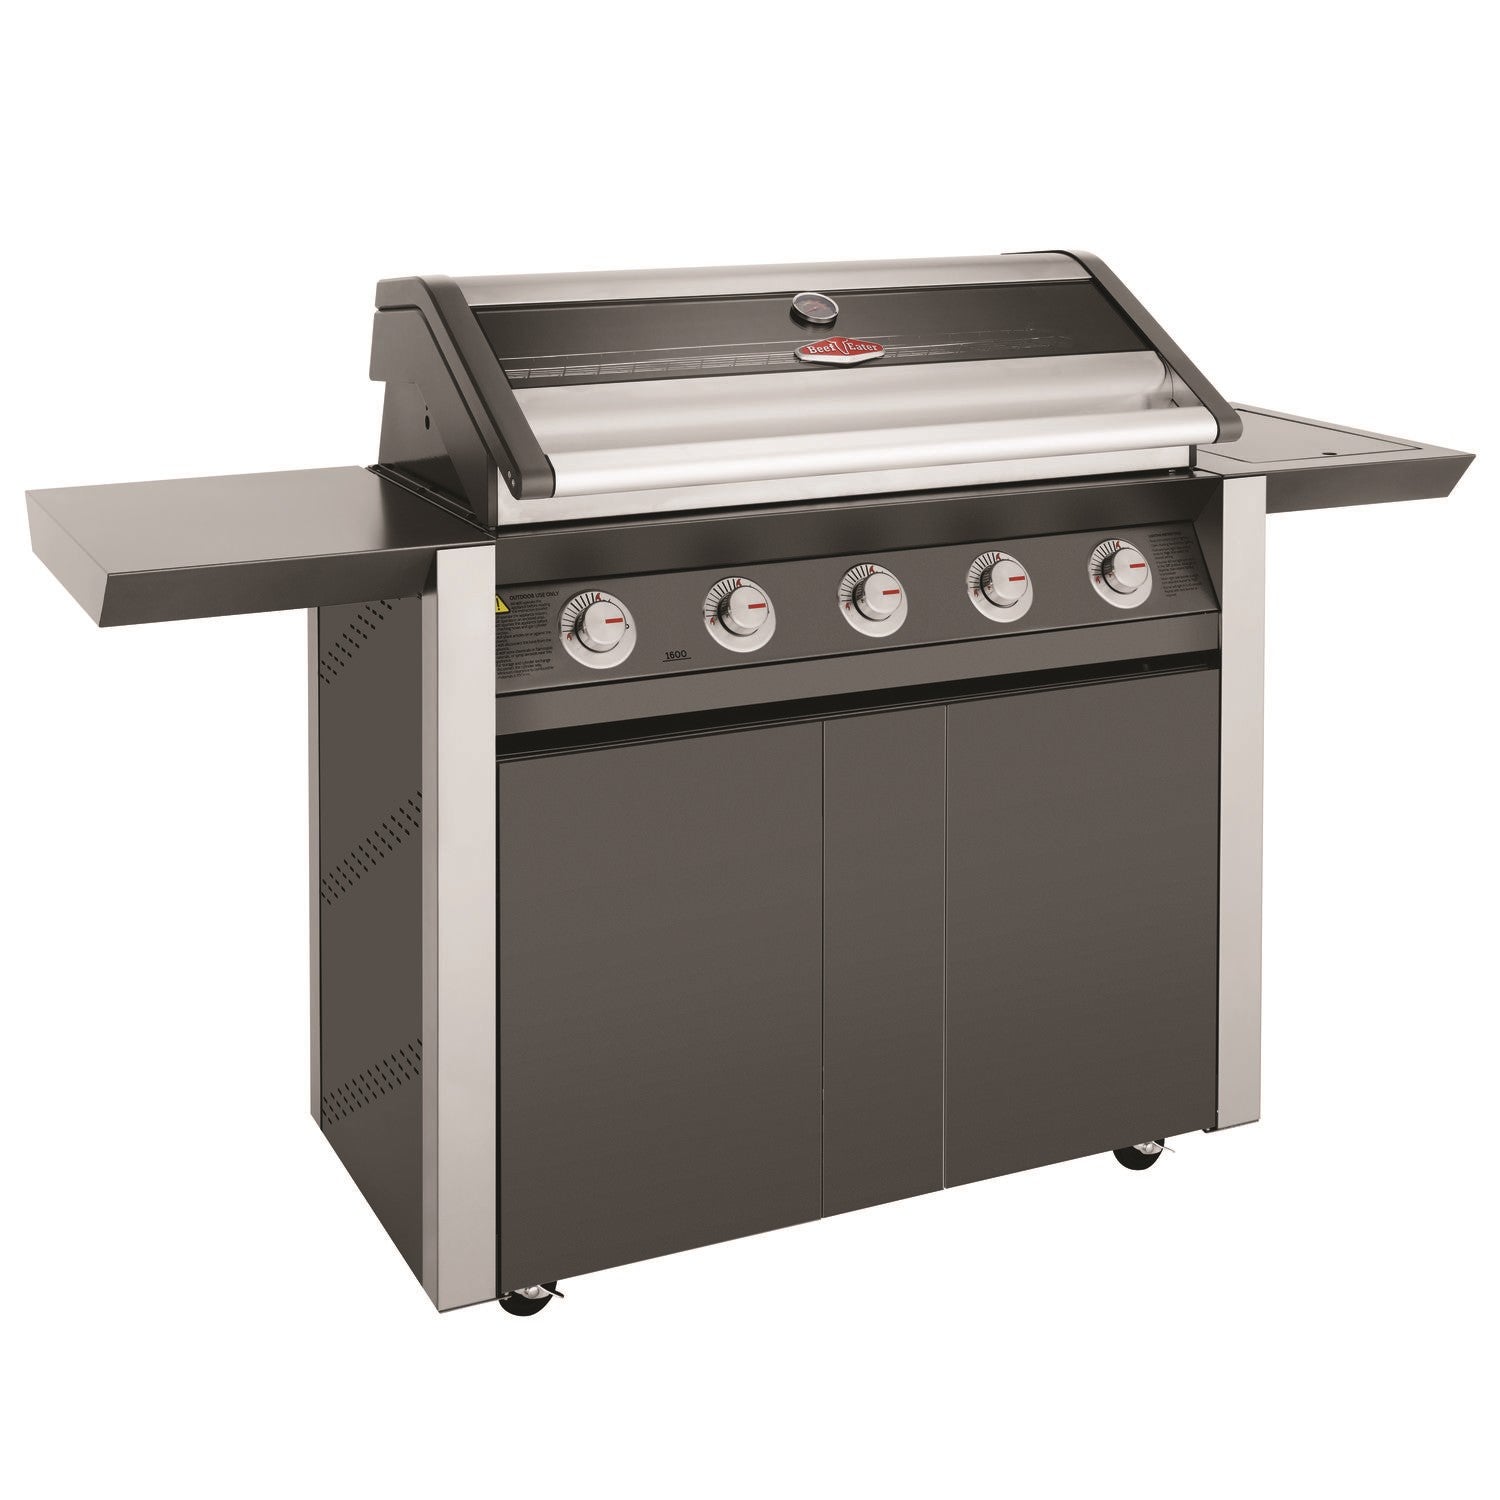 Beefeater 1600E Series - 5 Burner Gas Barbecue Grill and Trolley